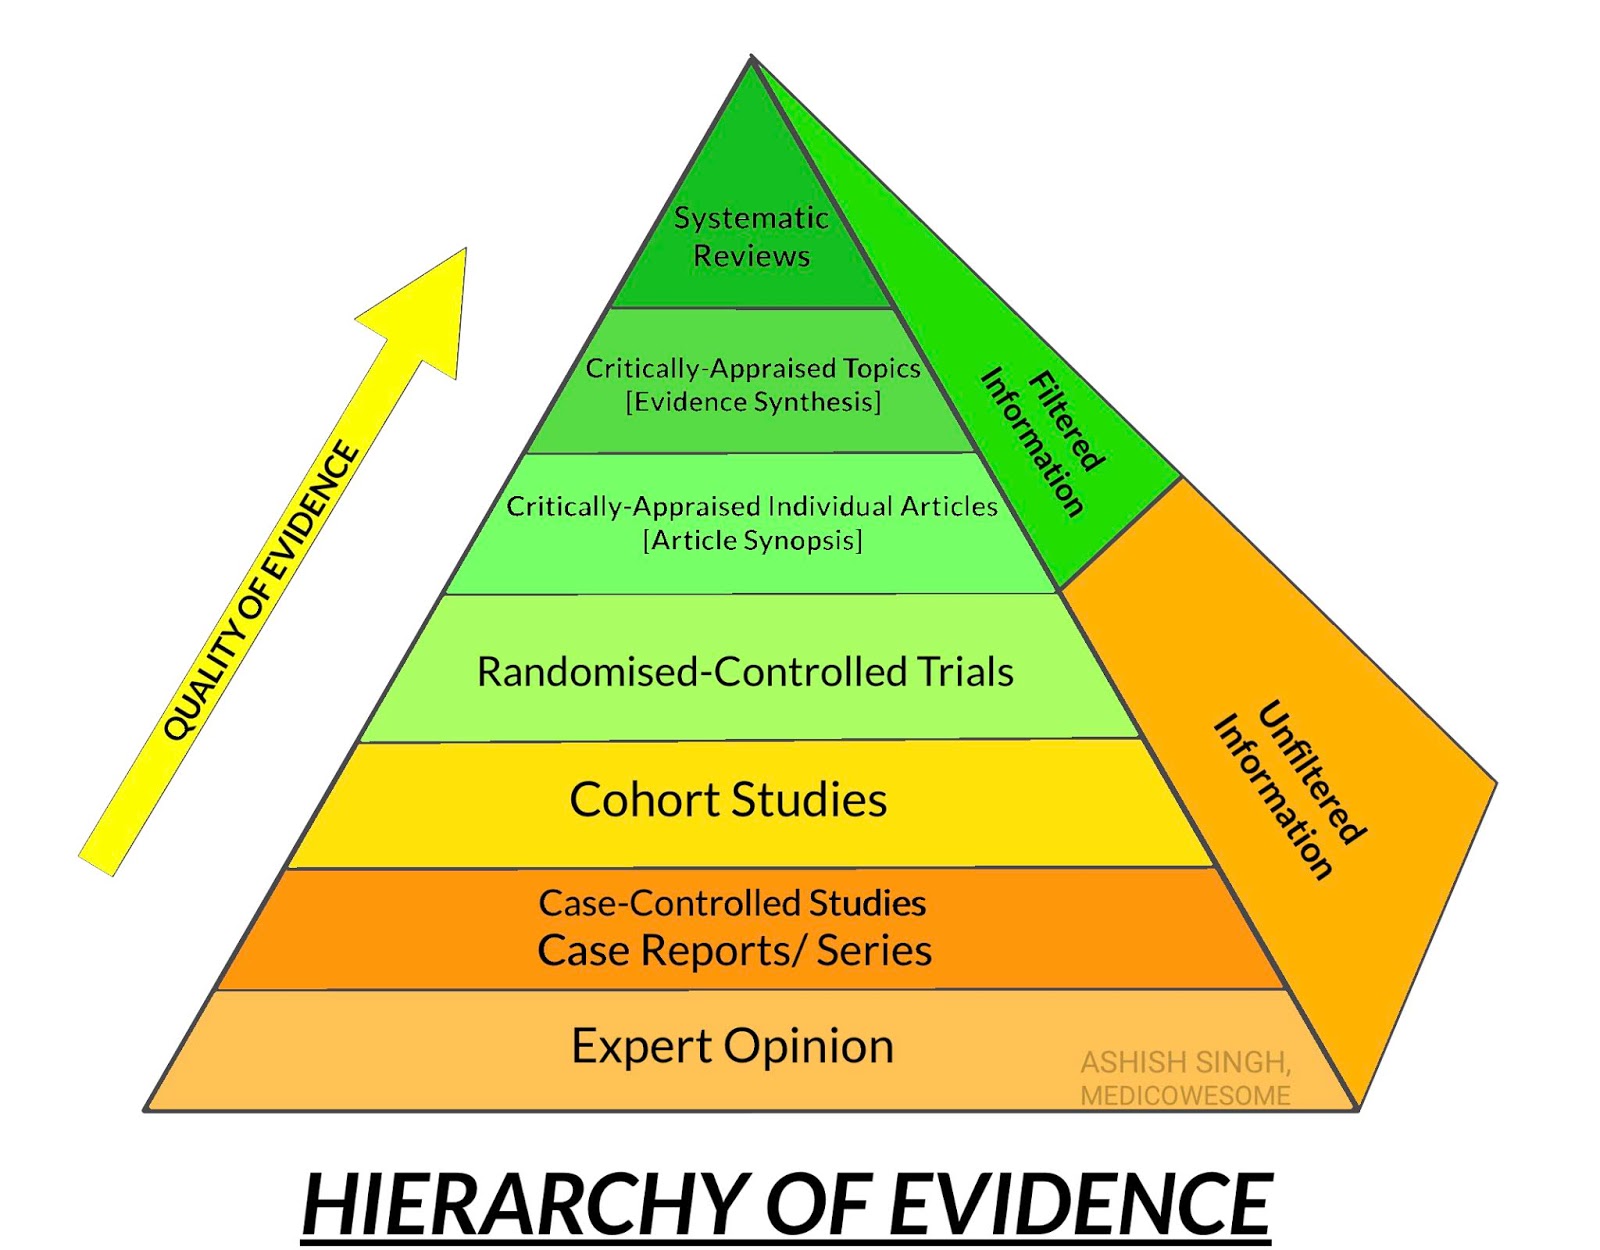 research types of evidence